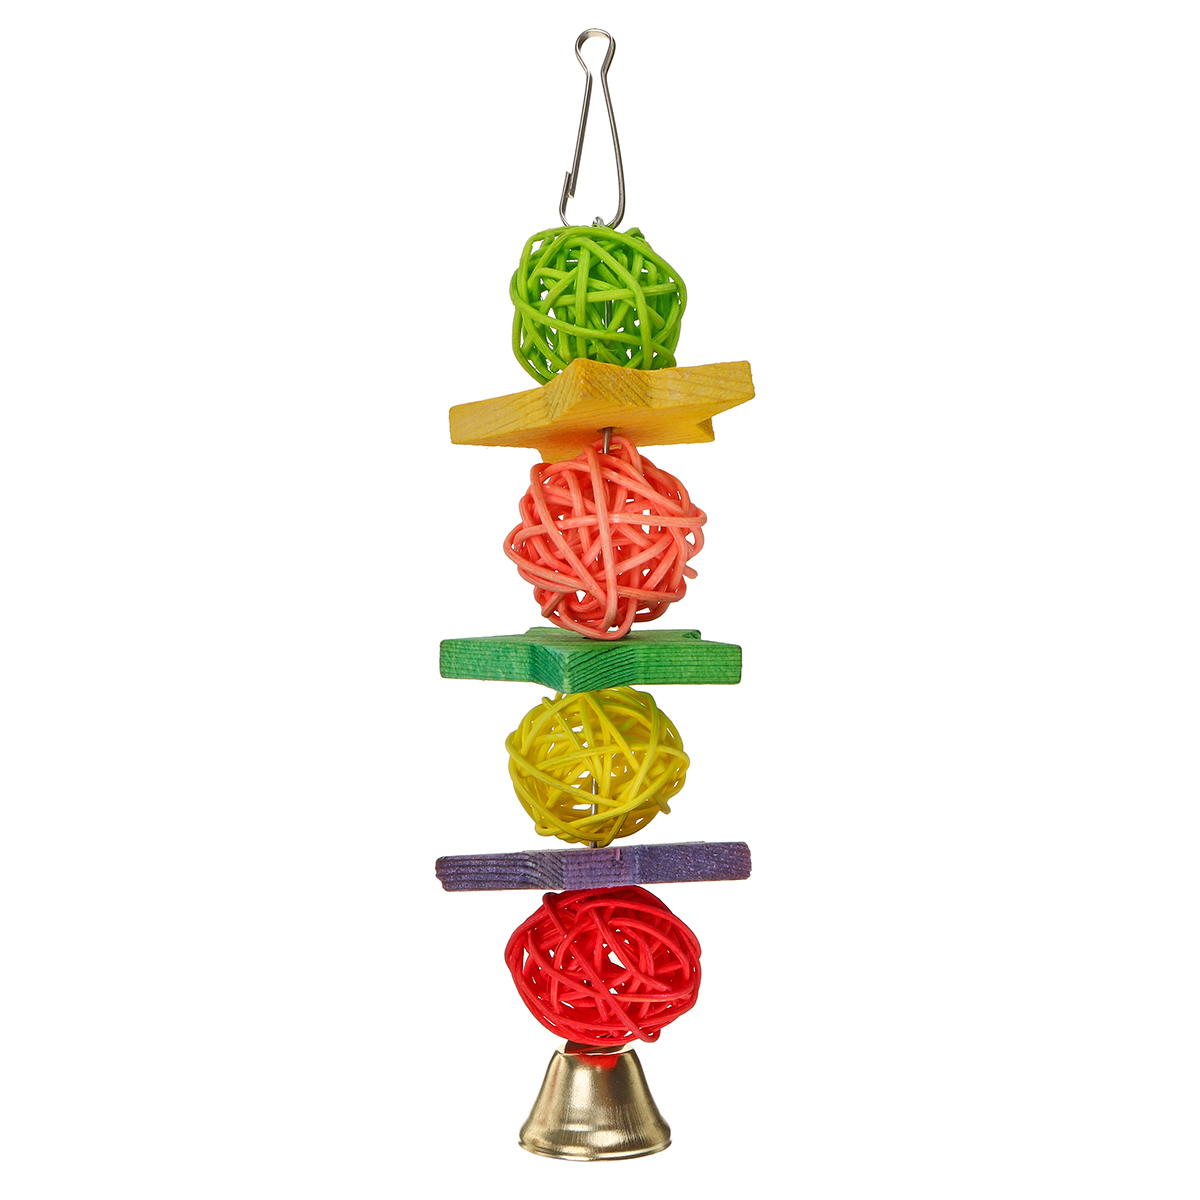 7PcsSet-Combination-Parrot-Toy-Bird-Articles-Parrot-Bite-Toy-Parrot-Funny-Swing-Ball-Bell-Standing-T-1703265-7